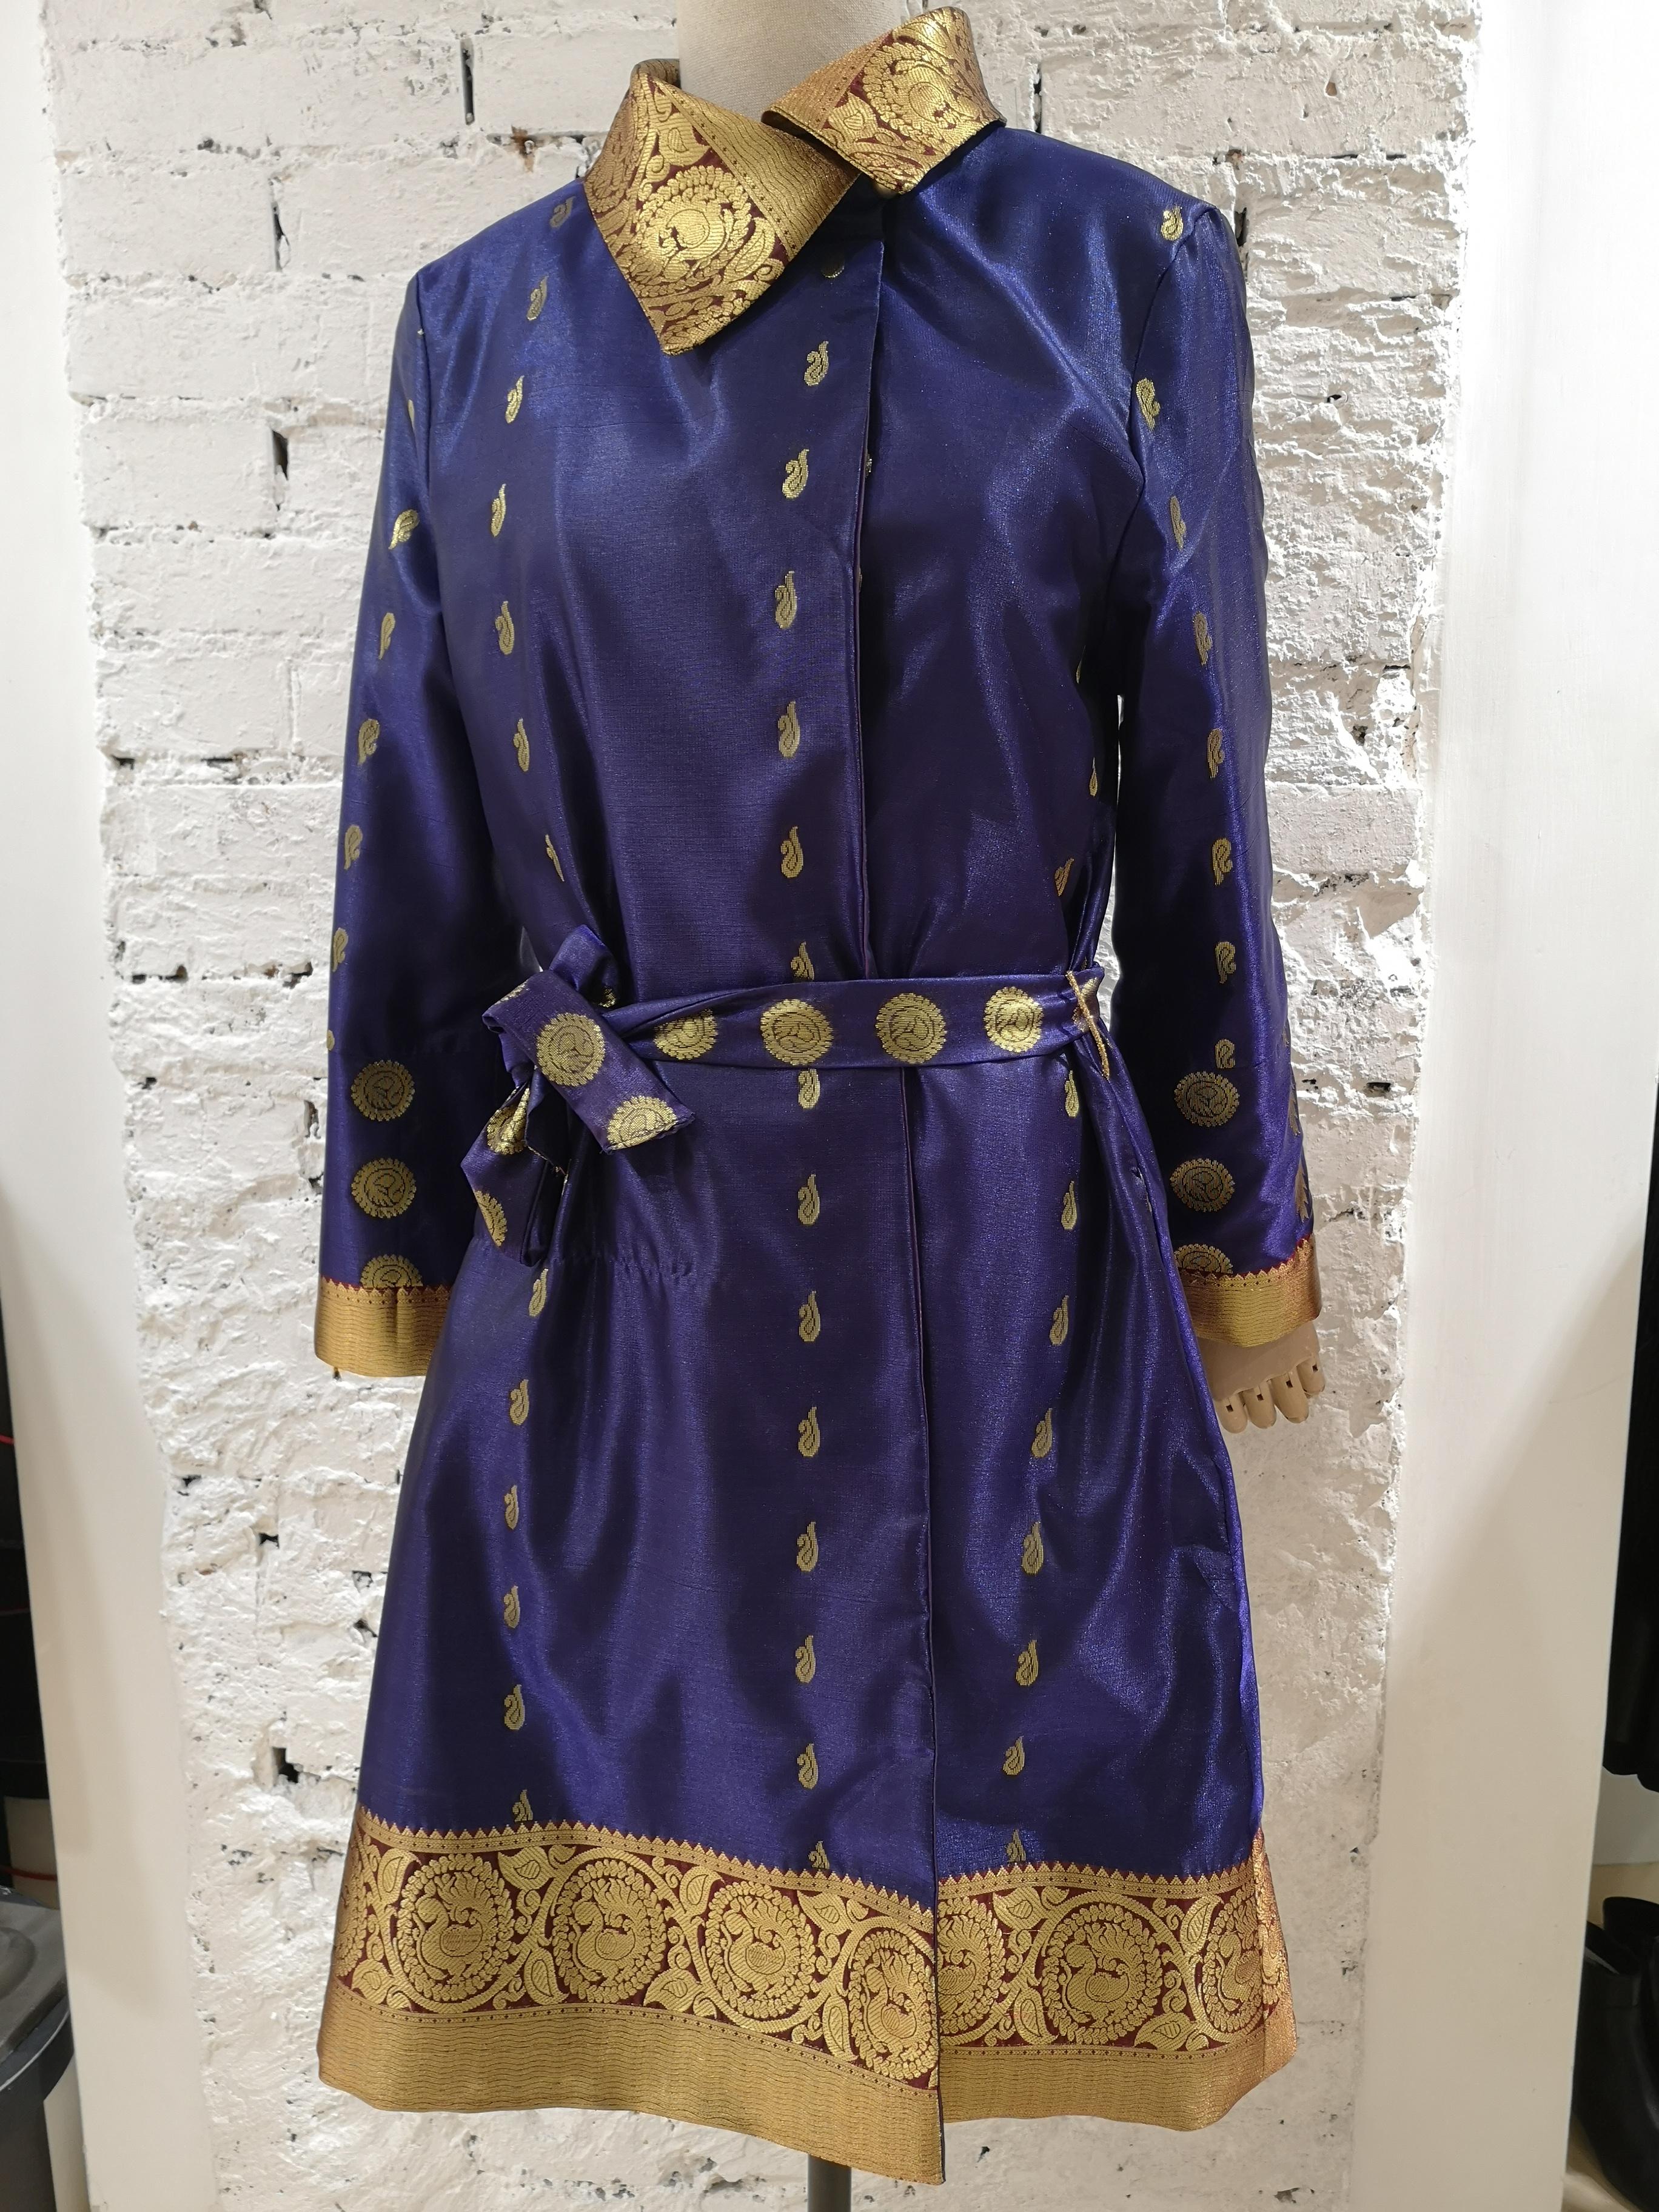 Women's or Men's Ermetique blue and gold trench coat 